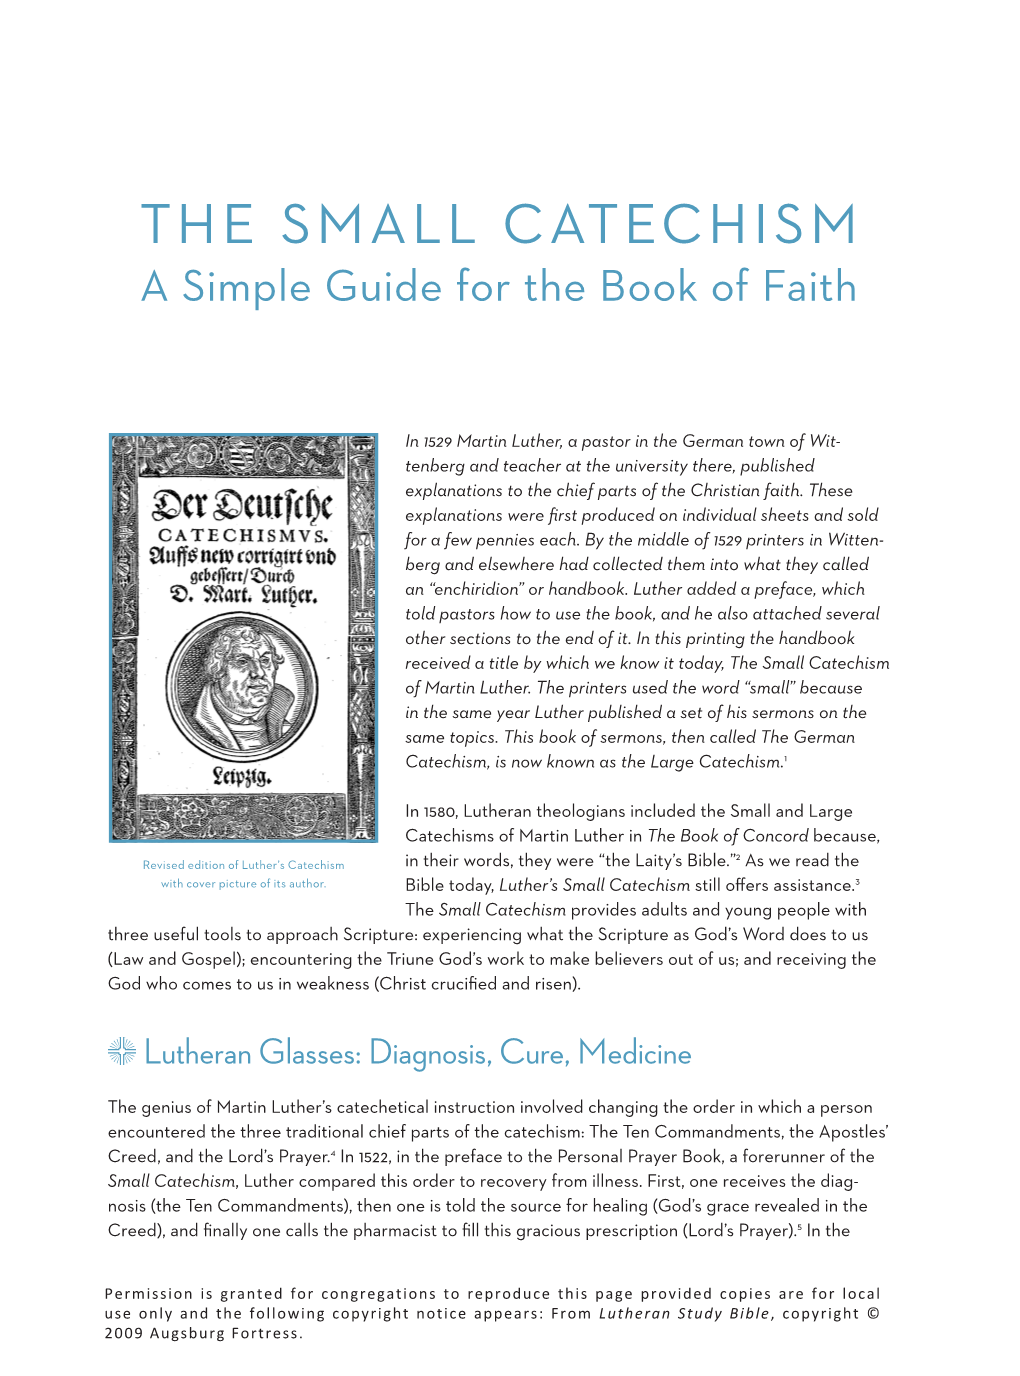 The Small Catechism a Simple Guide for the Book of Faith